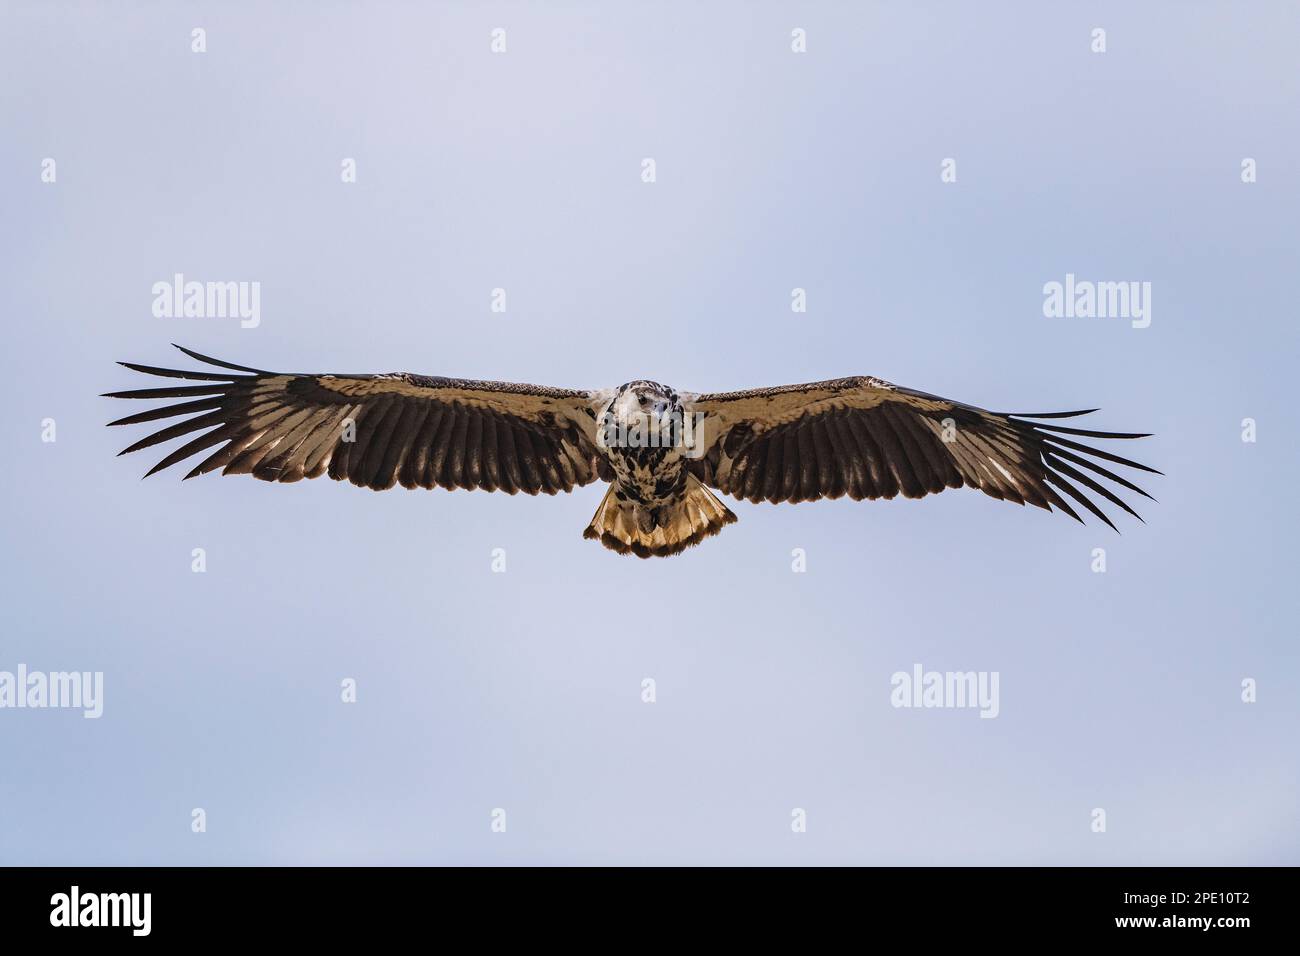 A juvenile African Fish Eagle is seen in flight in Zimbabwe's Hwange National Park. Stock Photo